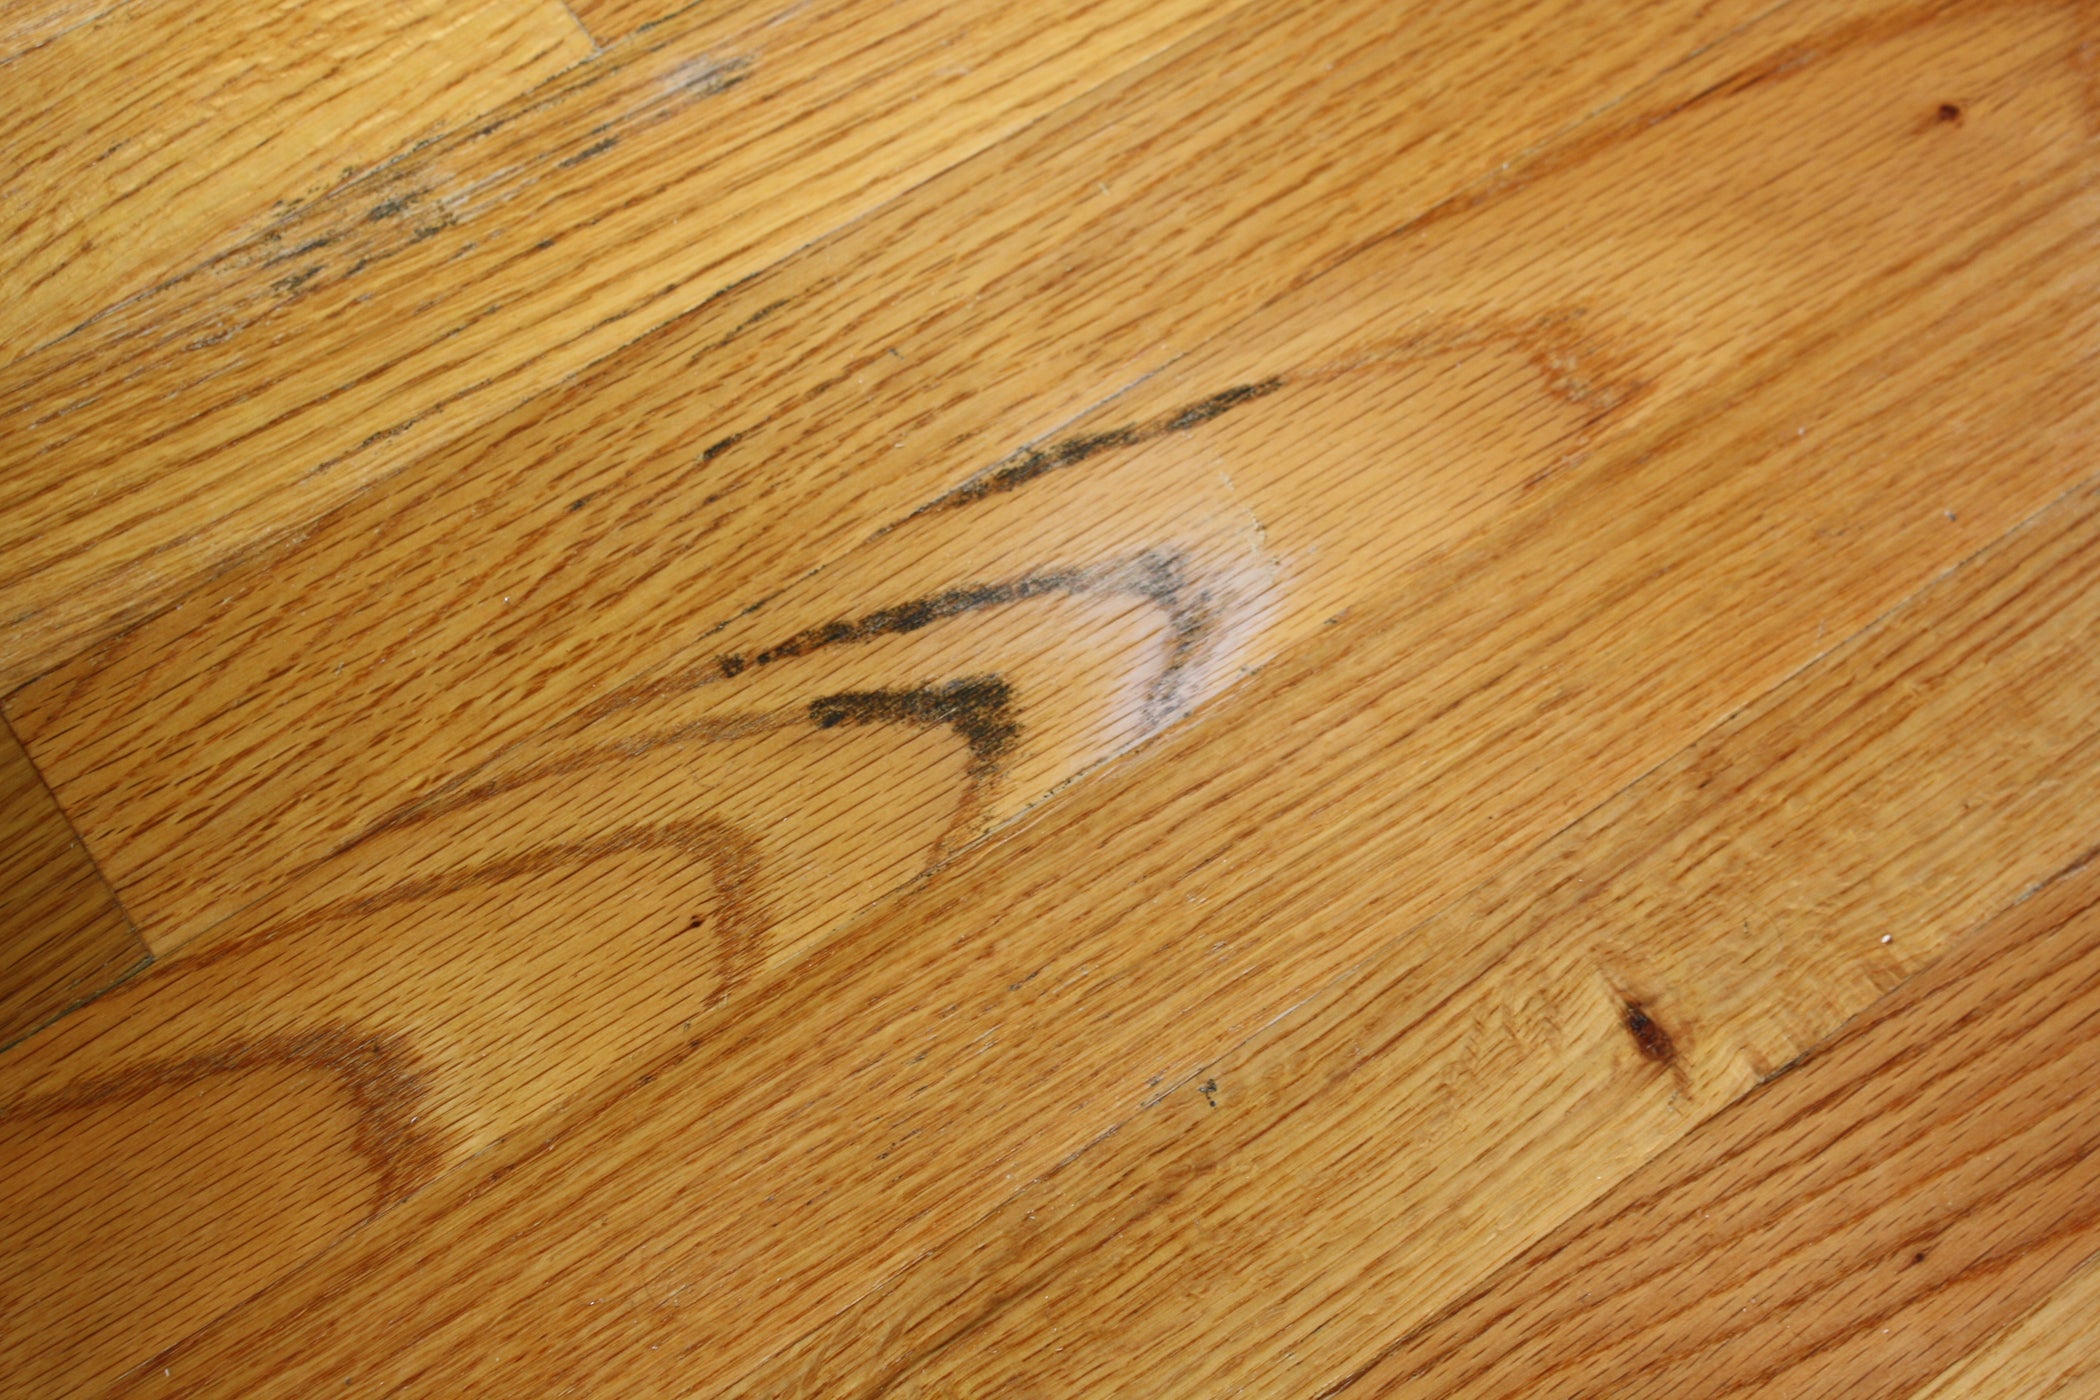 How to Clean Mold From a Wood Floor : 4 Steps